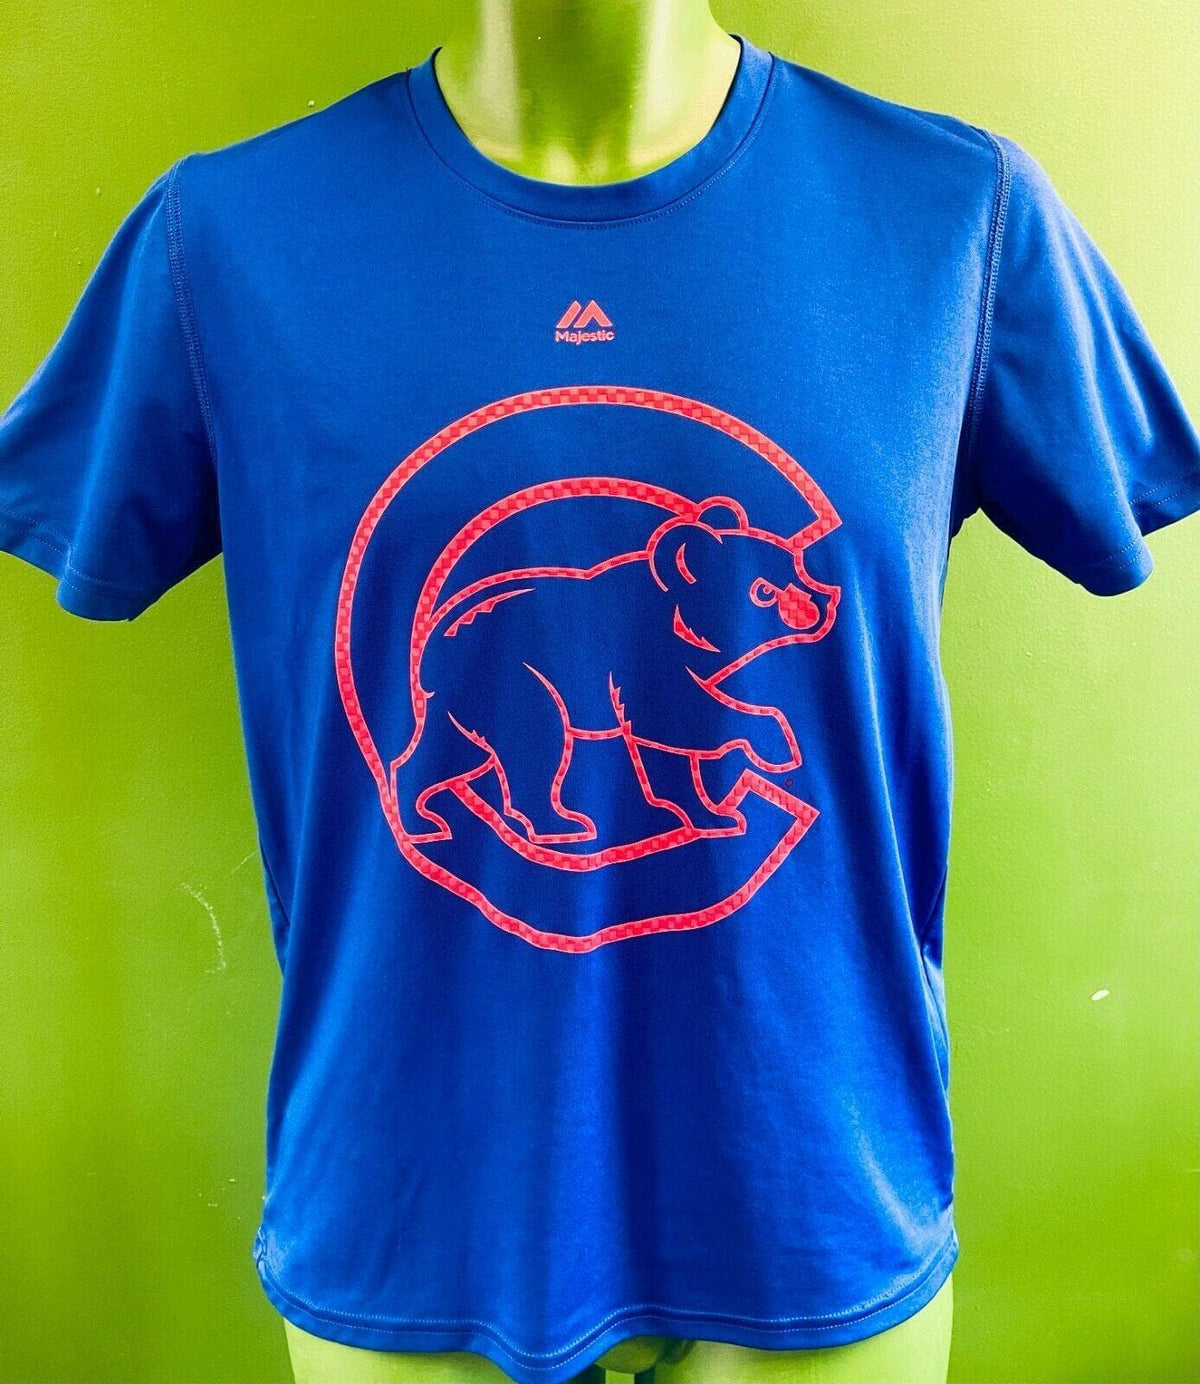 MLB Chicago Cubs Majestic Wicking T-Shirt Youth Large 14-16 - End Zone Kit